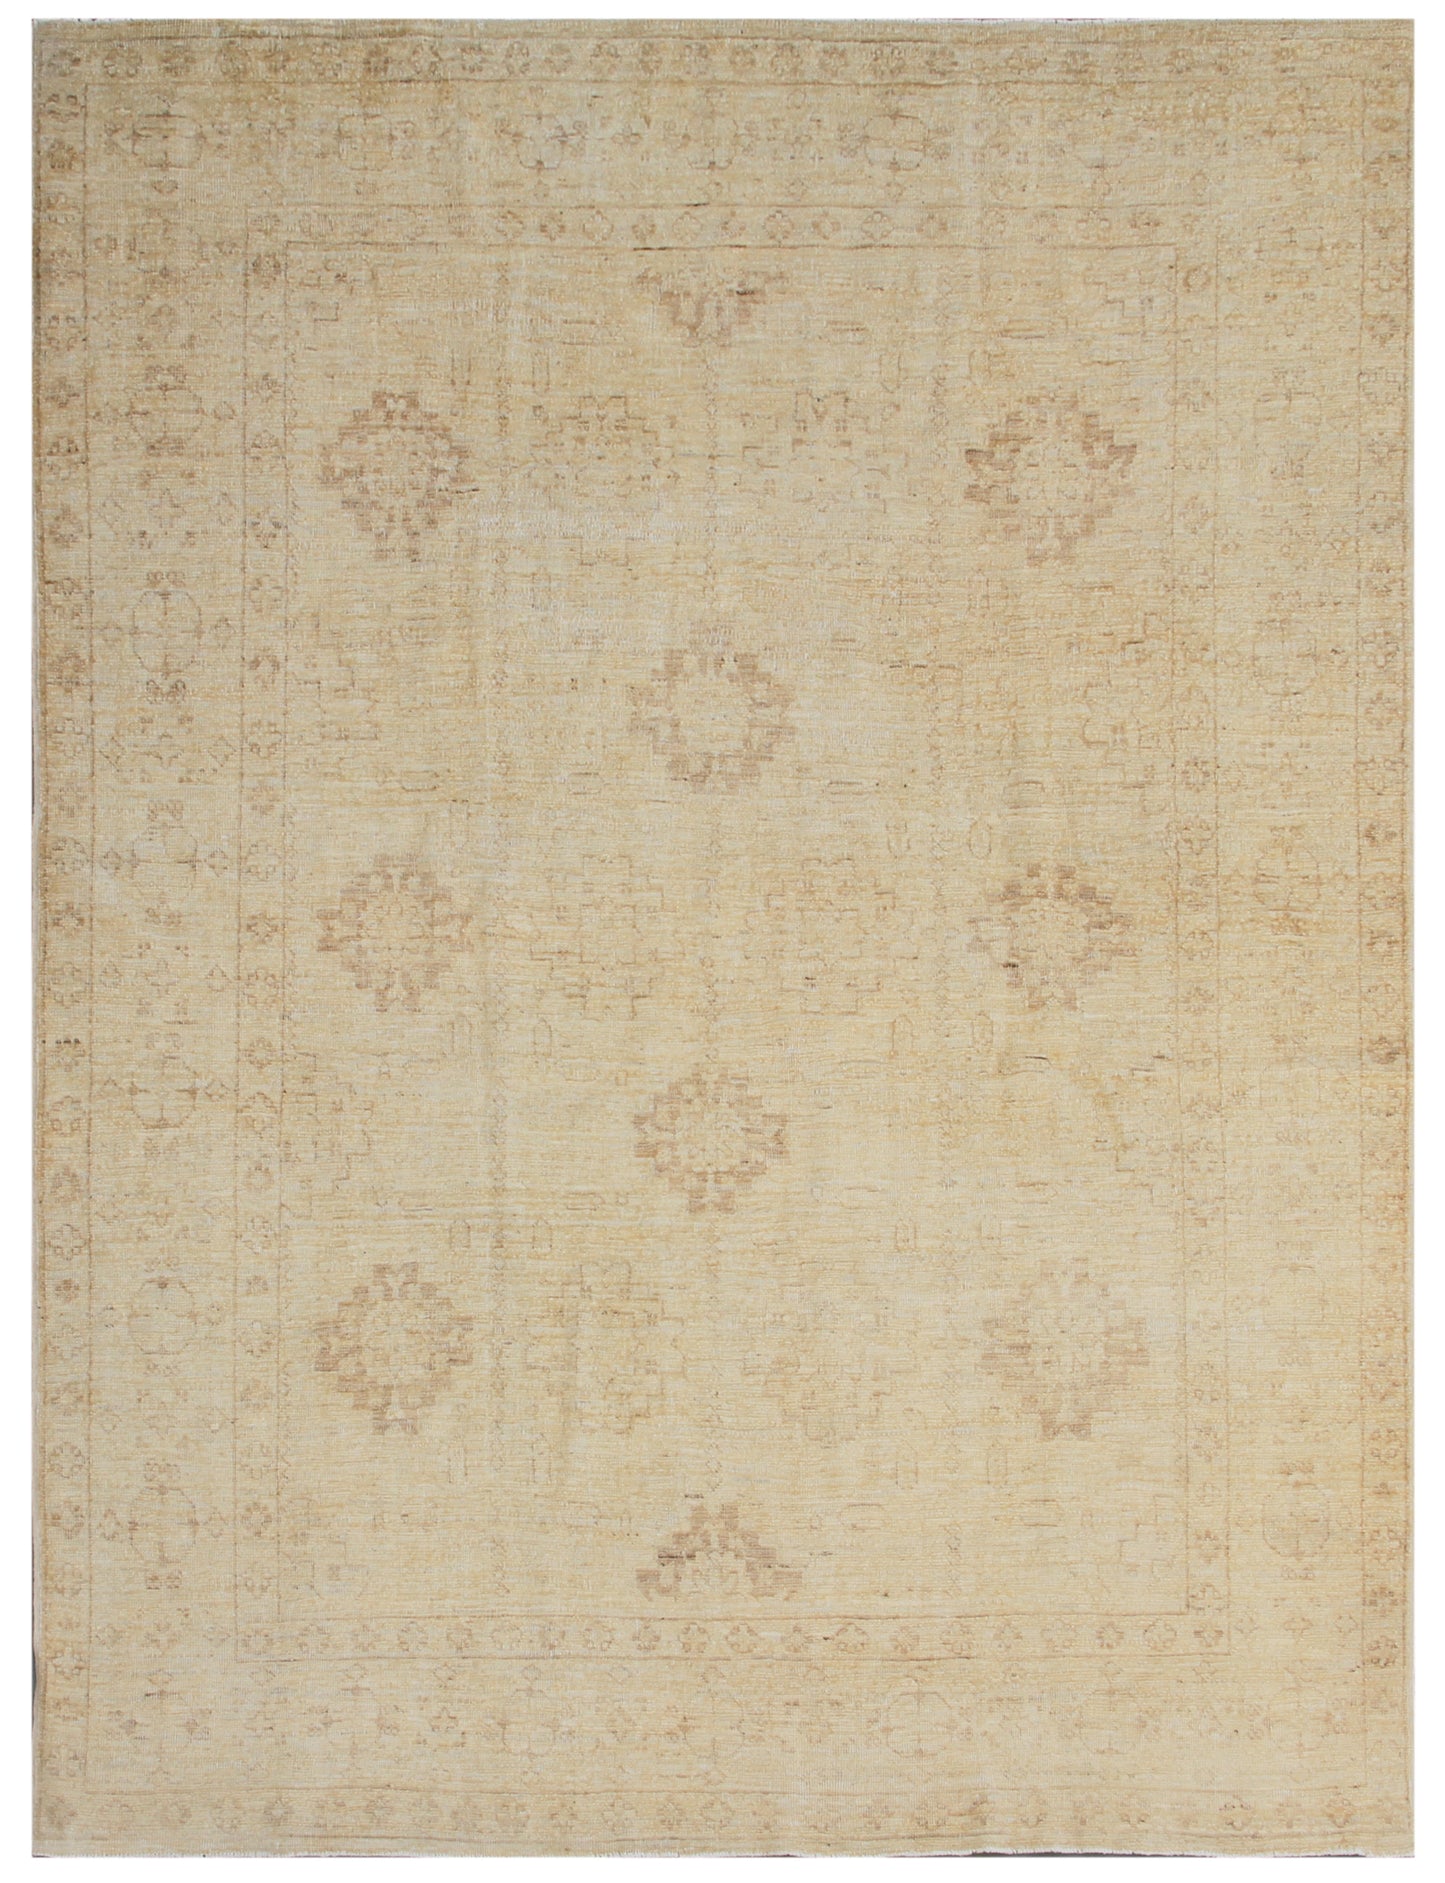 5'x6' Soft Washed-out Colors Contemporary Ariana Vintage Collection Rug